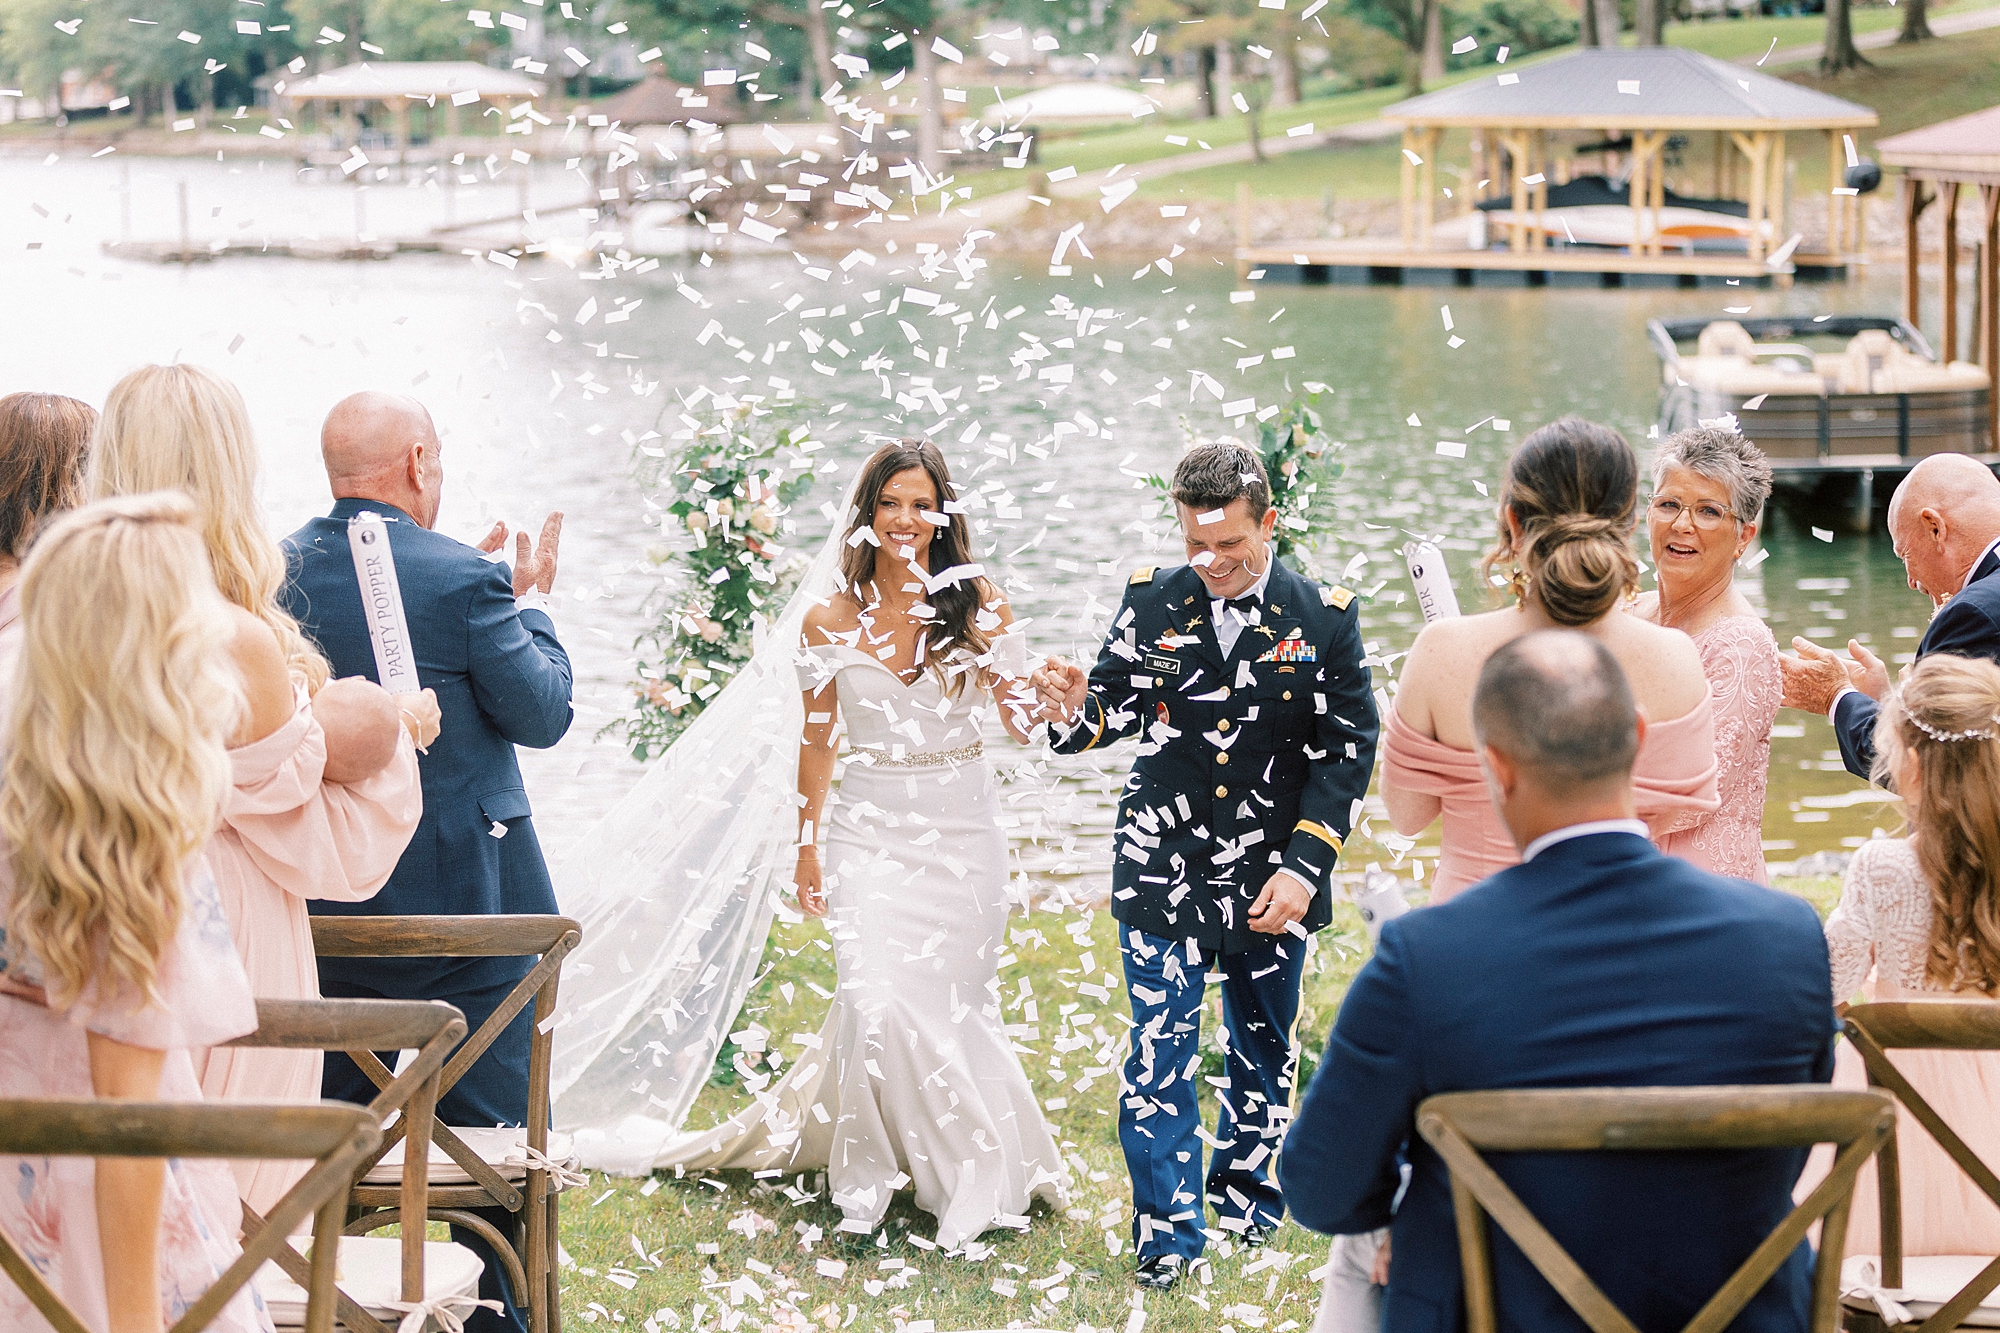 Wedding exit inspiration: Wedding photographer Kevyn Dixon shares her favorite Amazon finds to plan the perfect exit on your wedding day!